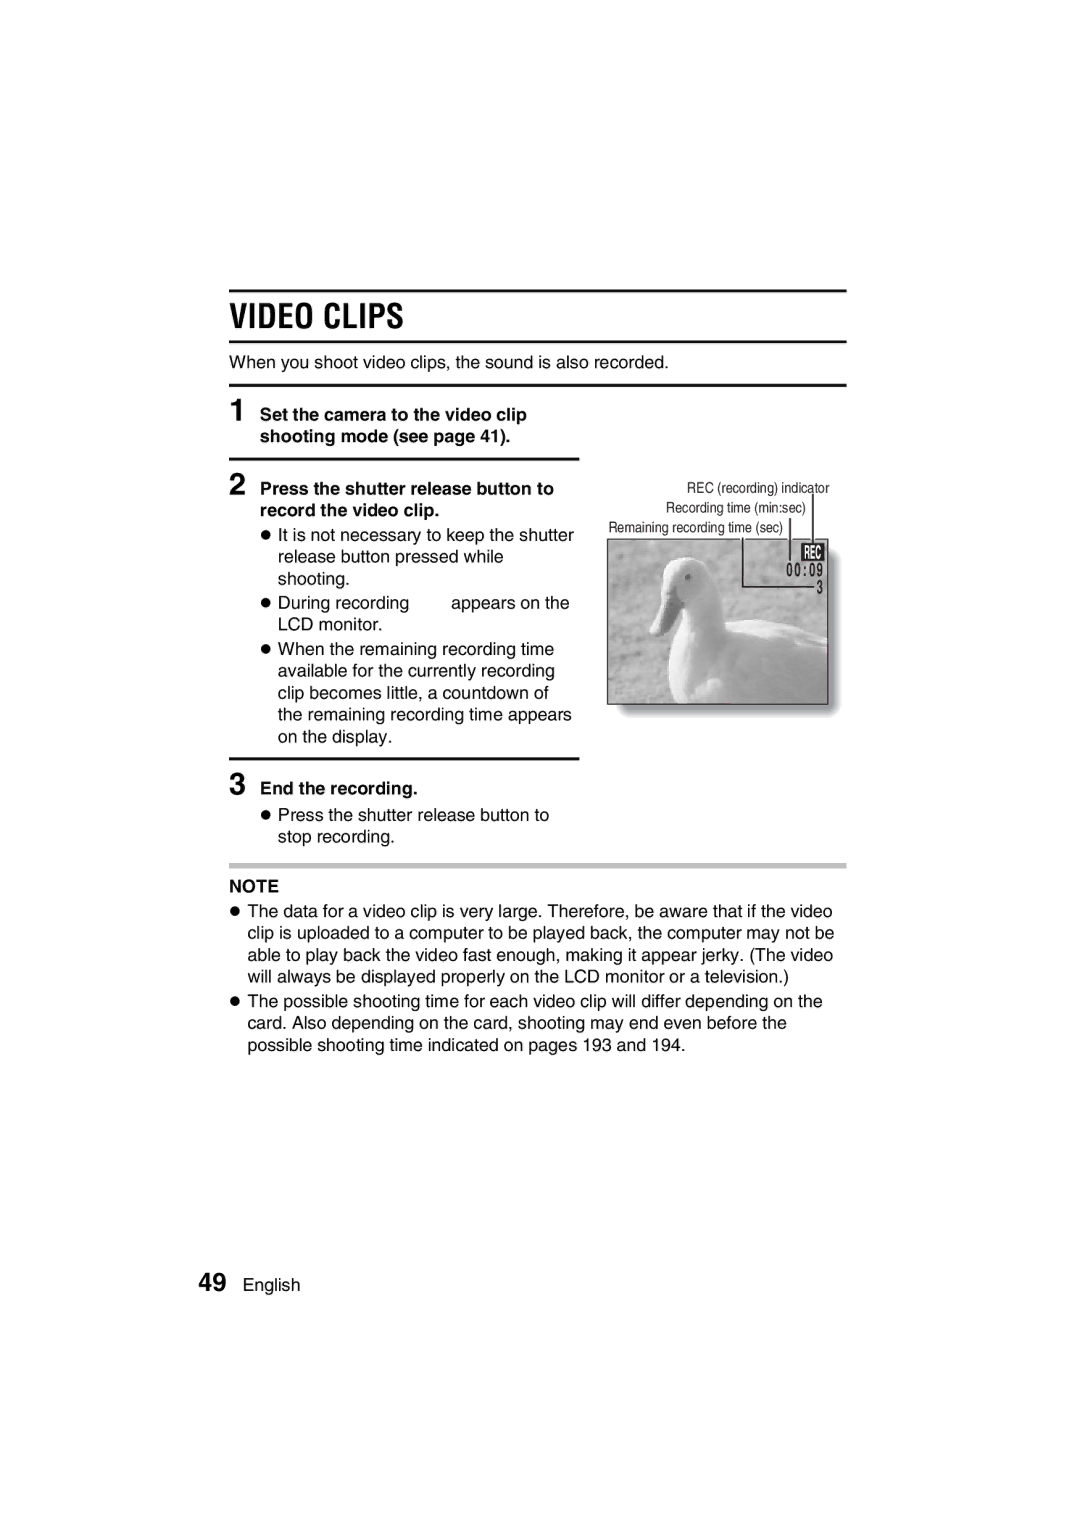 Sanyo VPC-J1EX instruction manual Video Clips, End the recording 